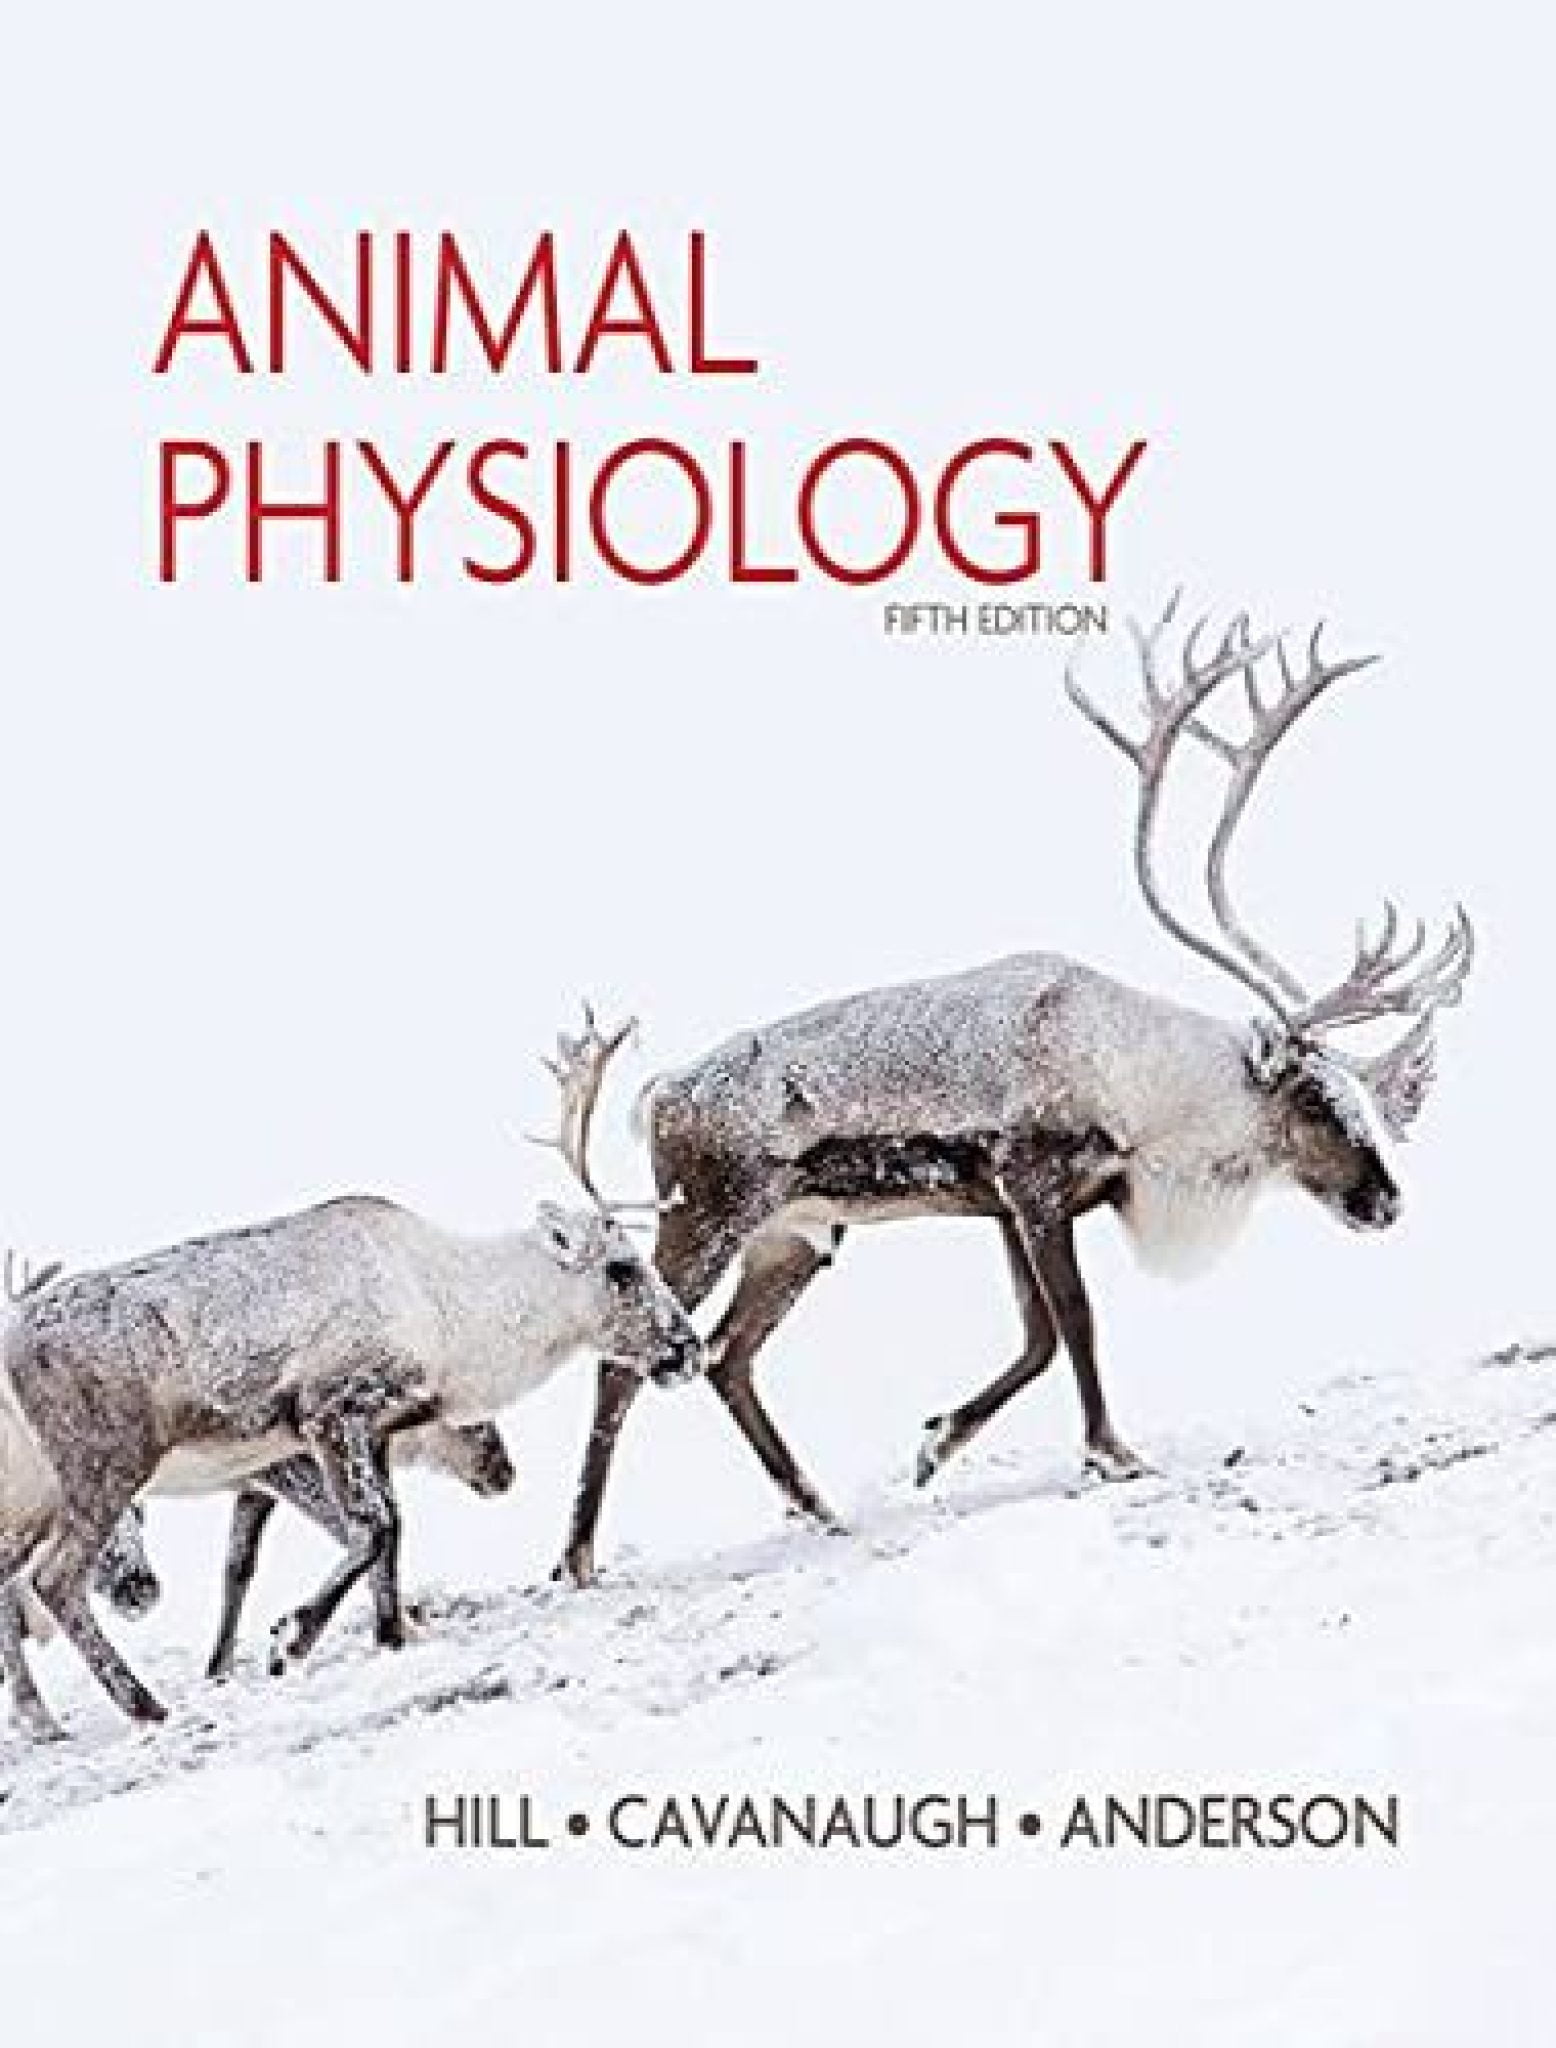 research topics in animal physiology